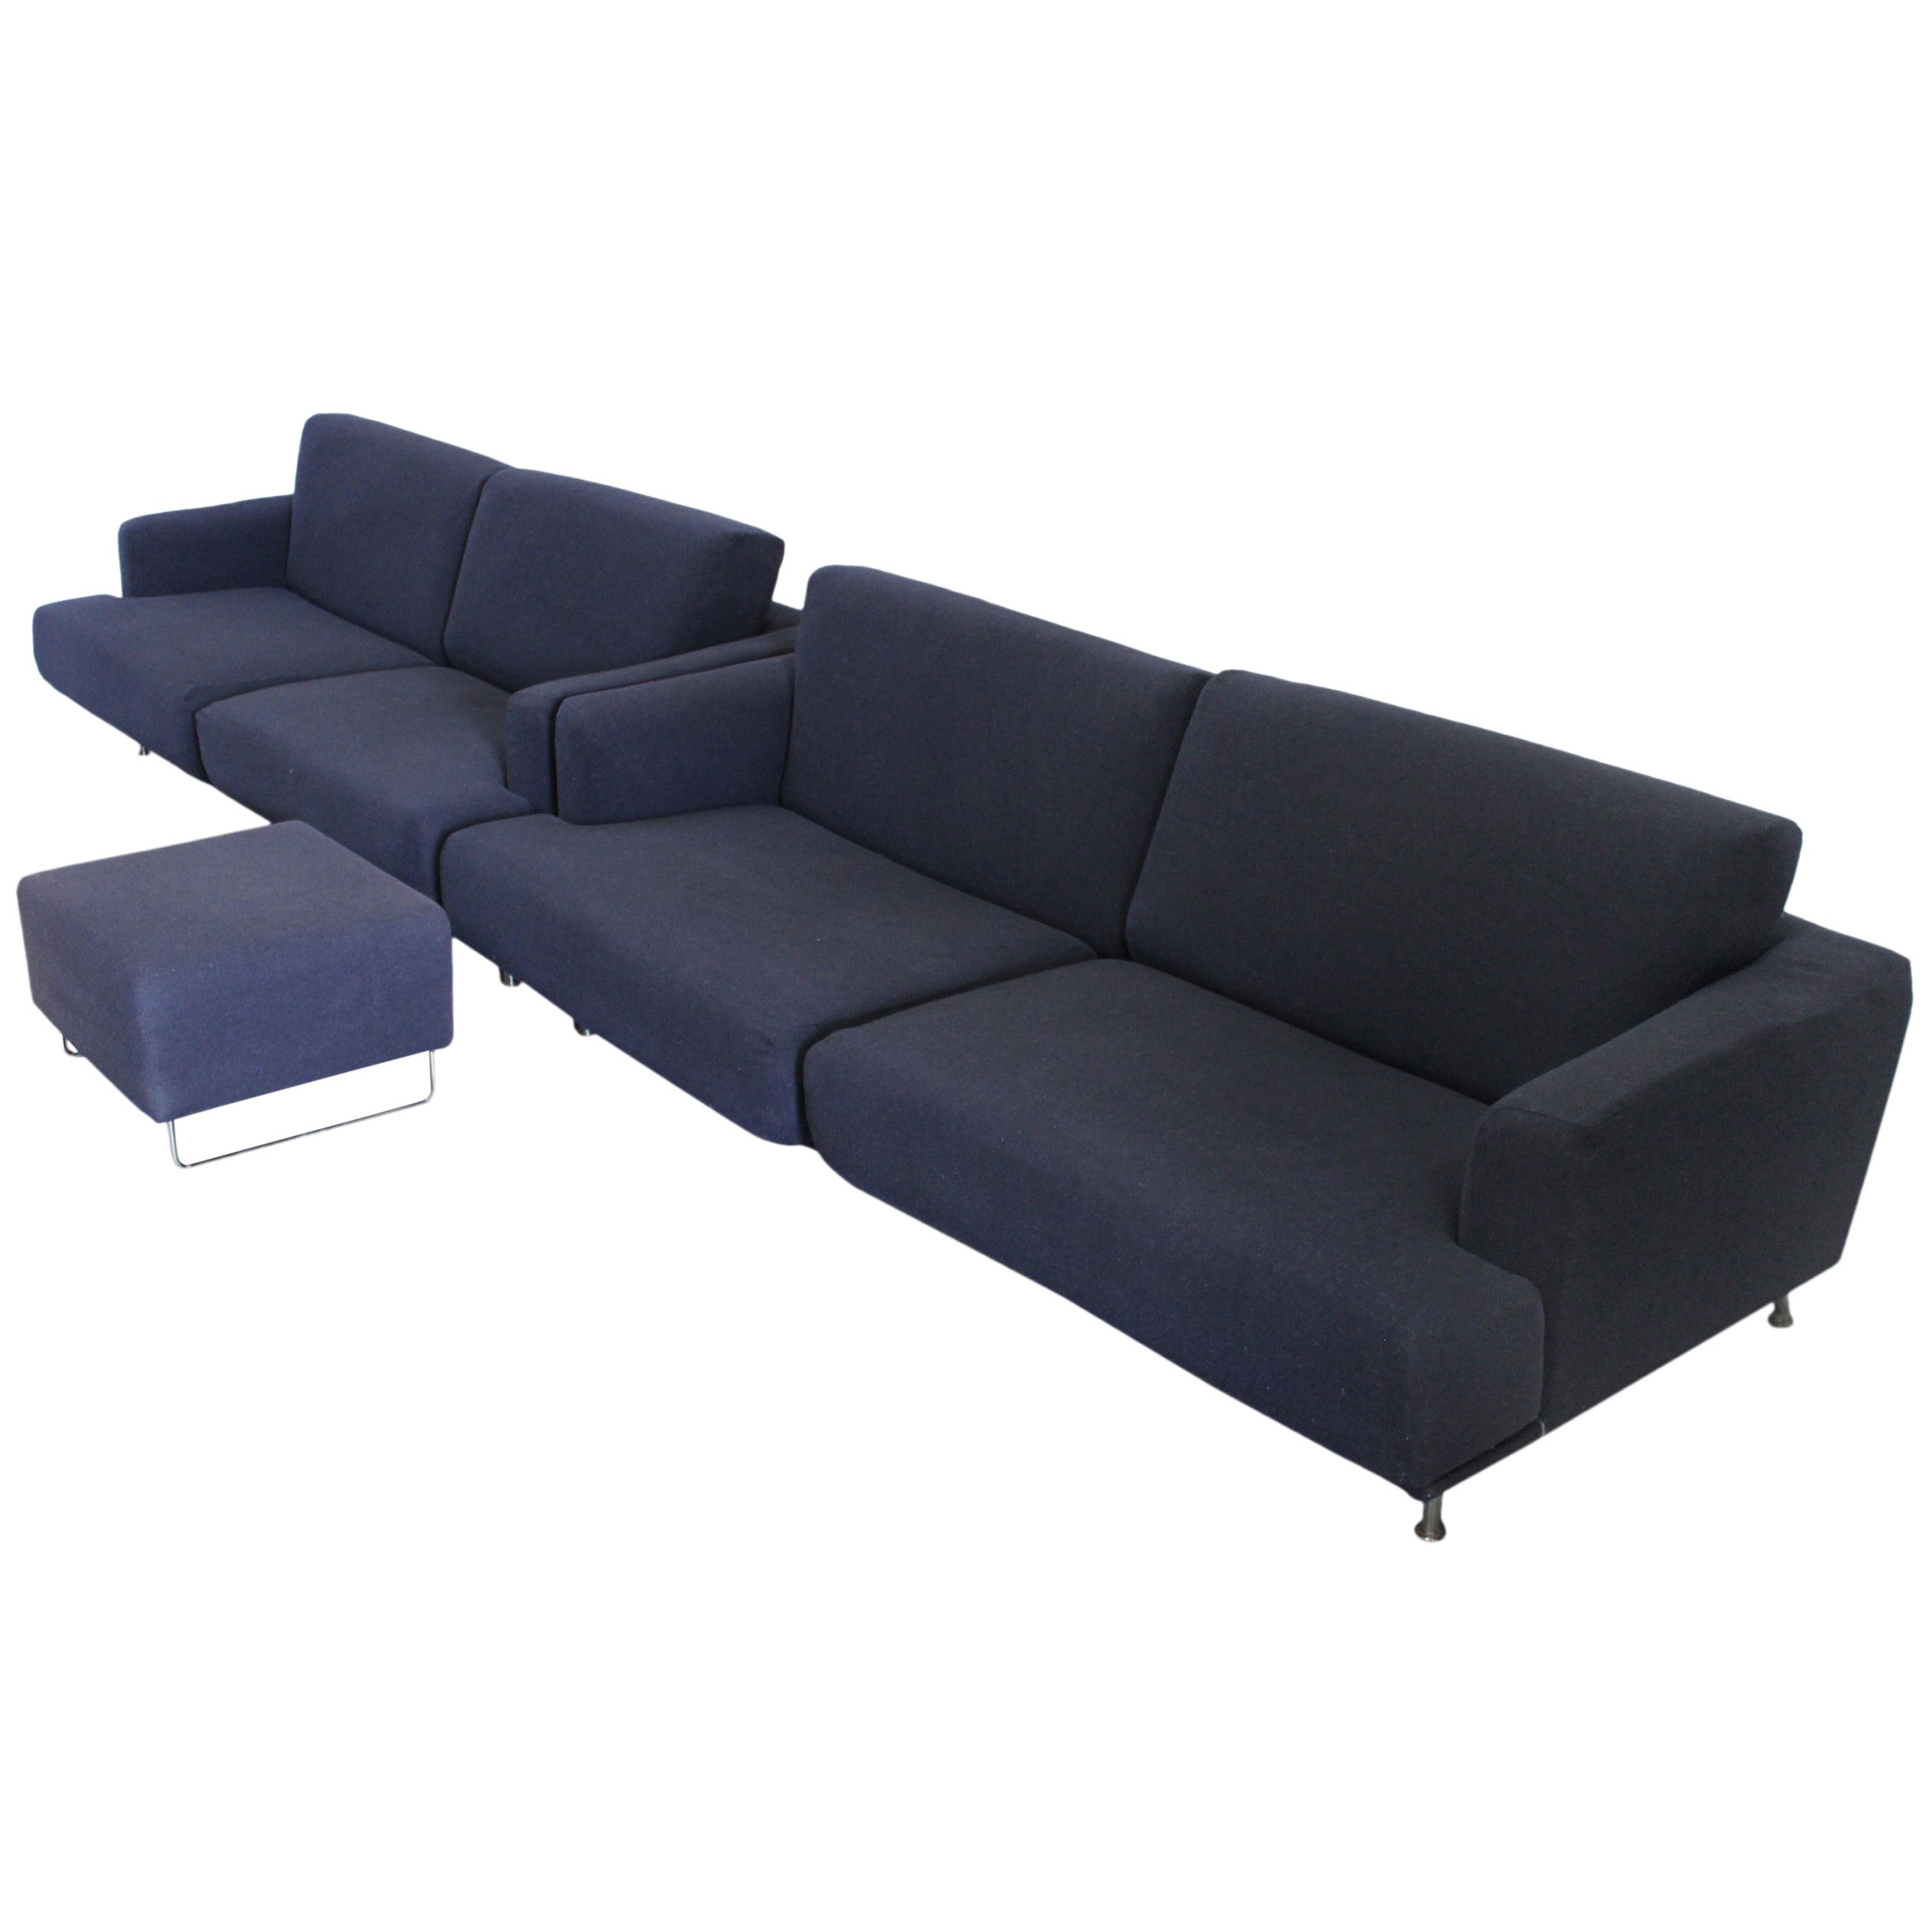 Cassina "253 Nest" Two Sofa and Ottoman Suite in Navy Blue Cashmere by Lissoni